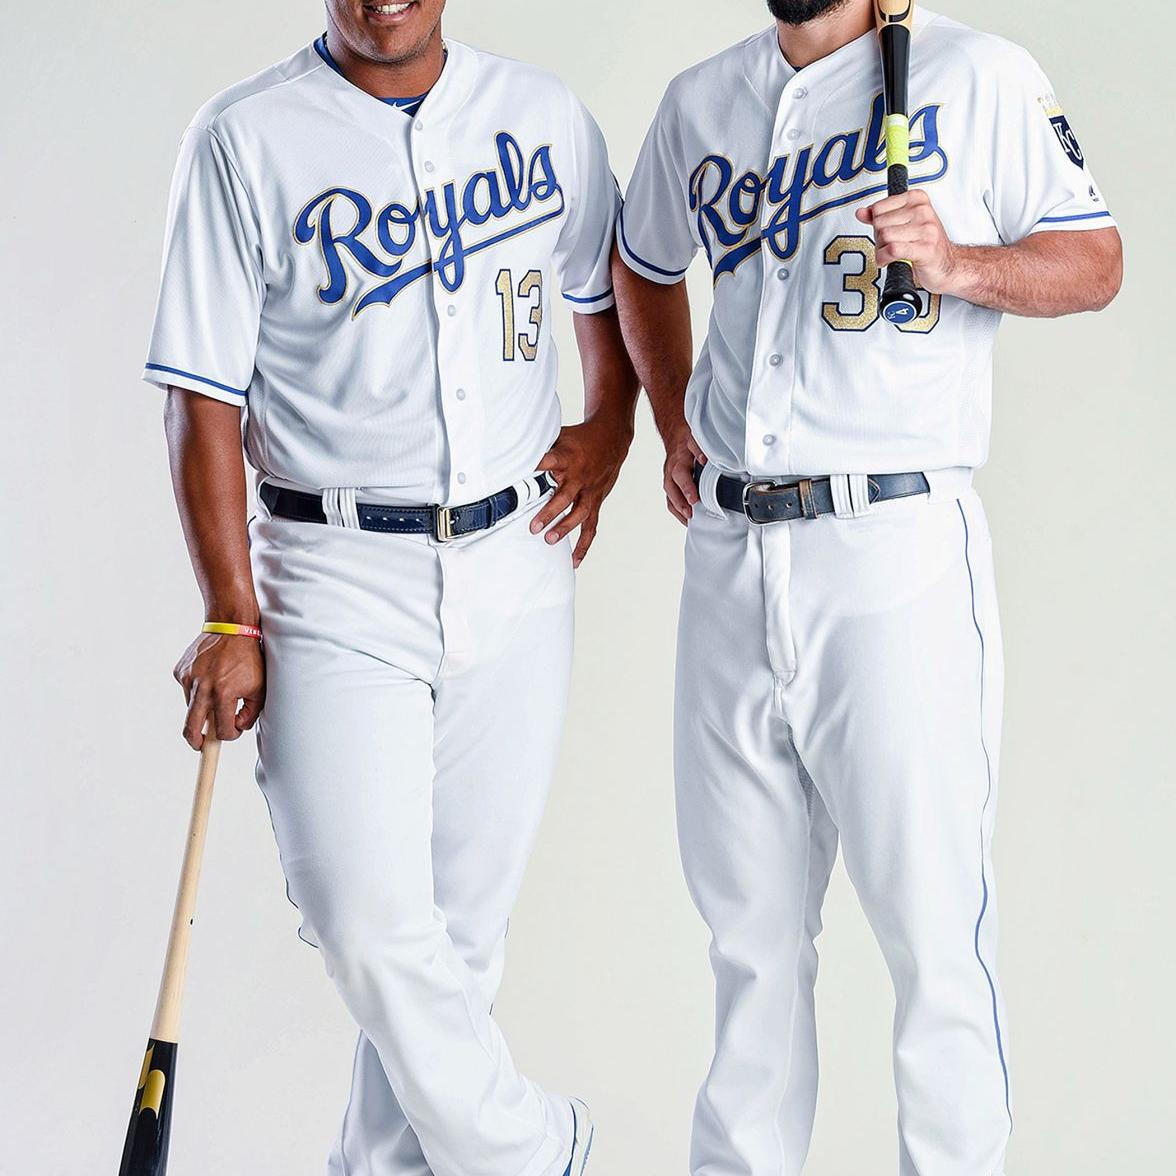 Royals to wear updated Friday night uniforms